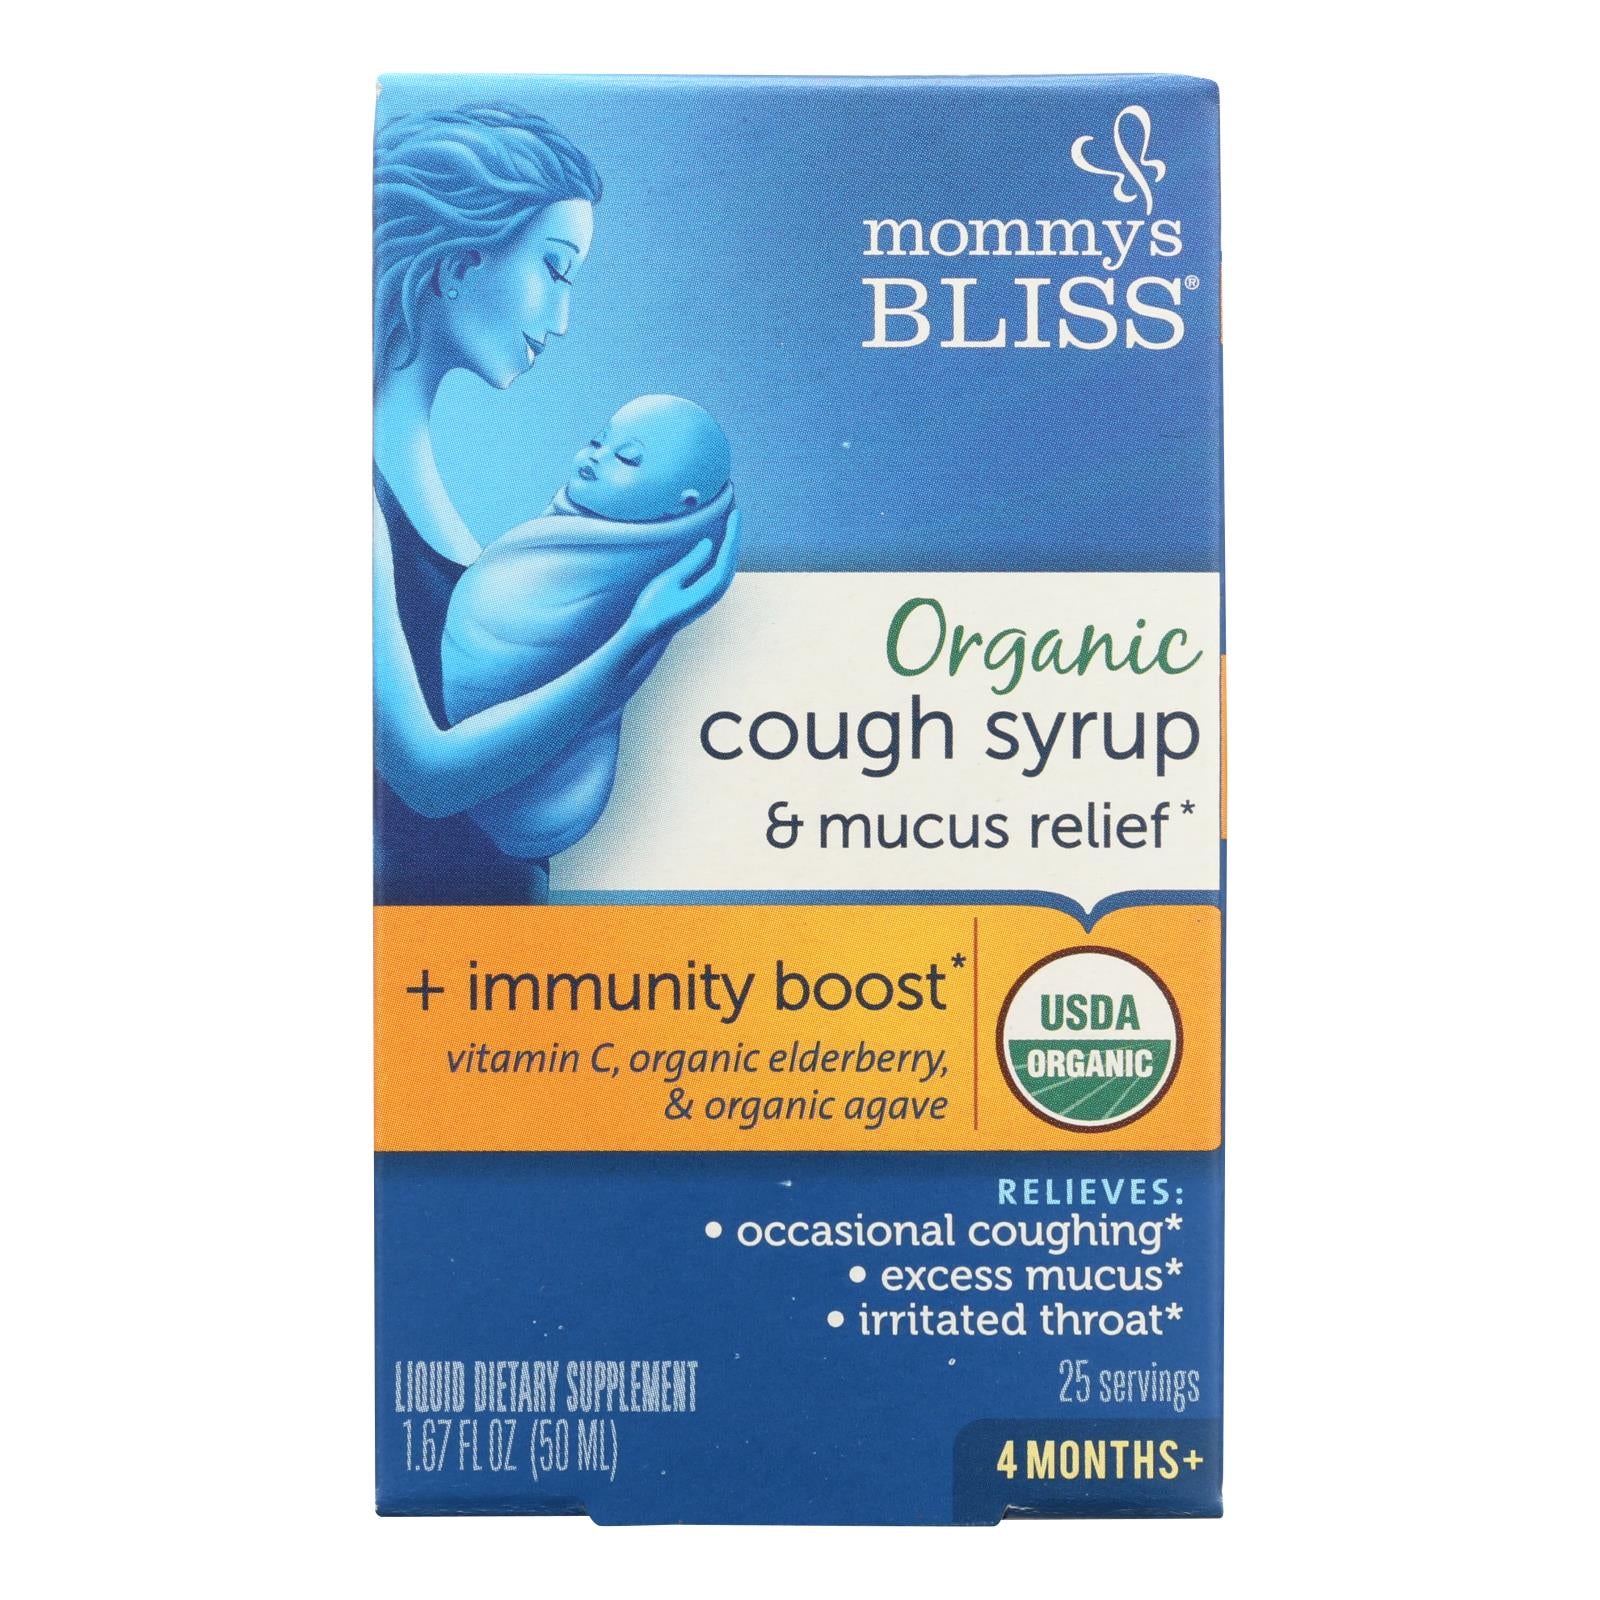 Mommy's Bliss - Cgh Syrup Baby Mucus Im - 1 Each - 1.67 FZ